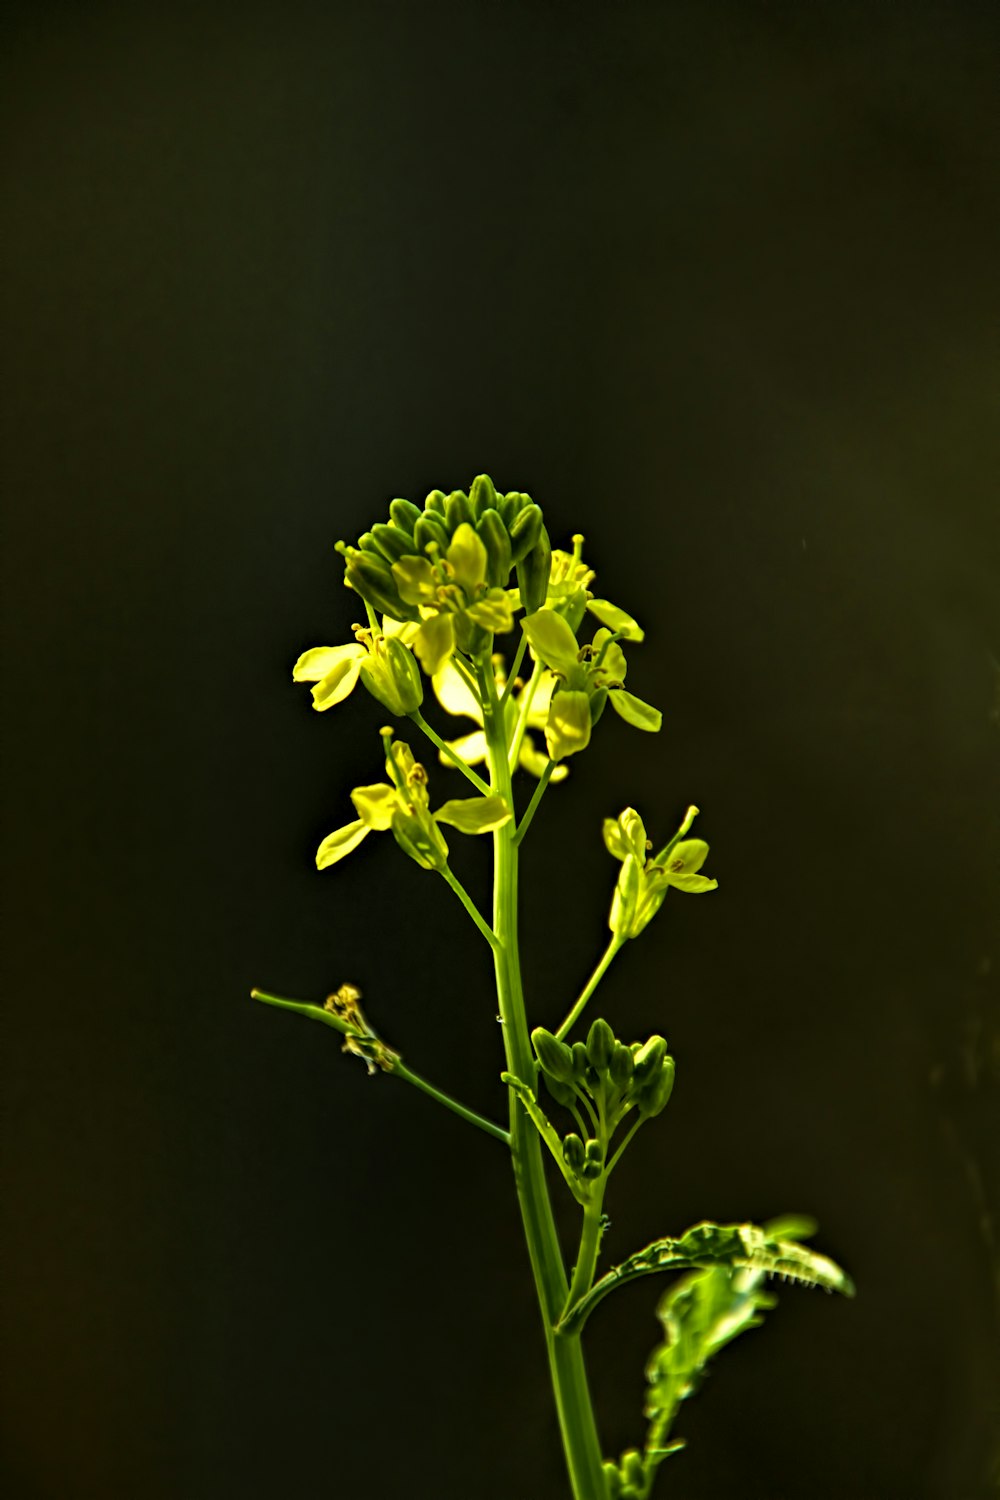 a close up of a yellow flower on a stem